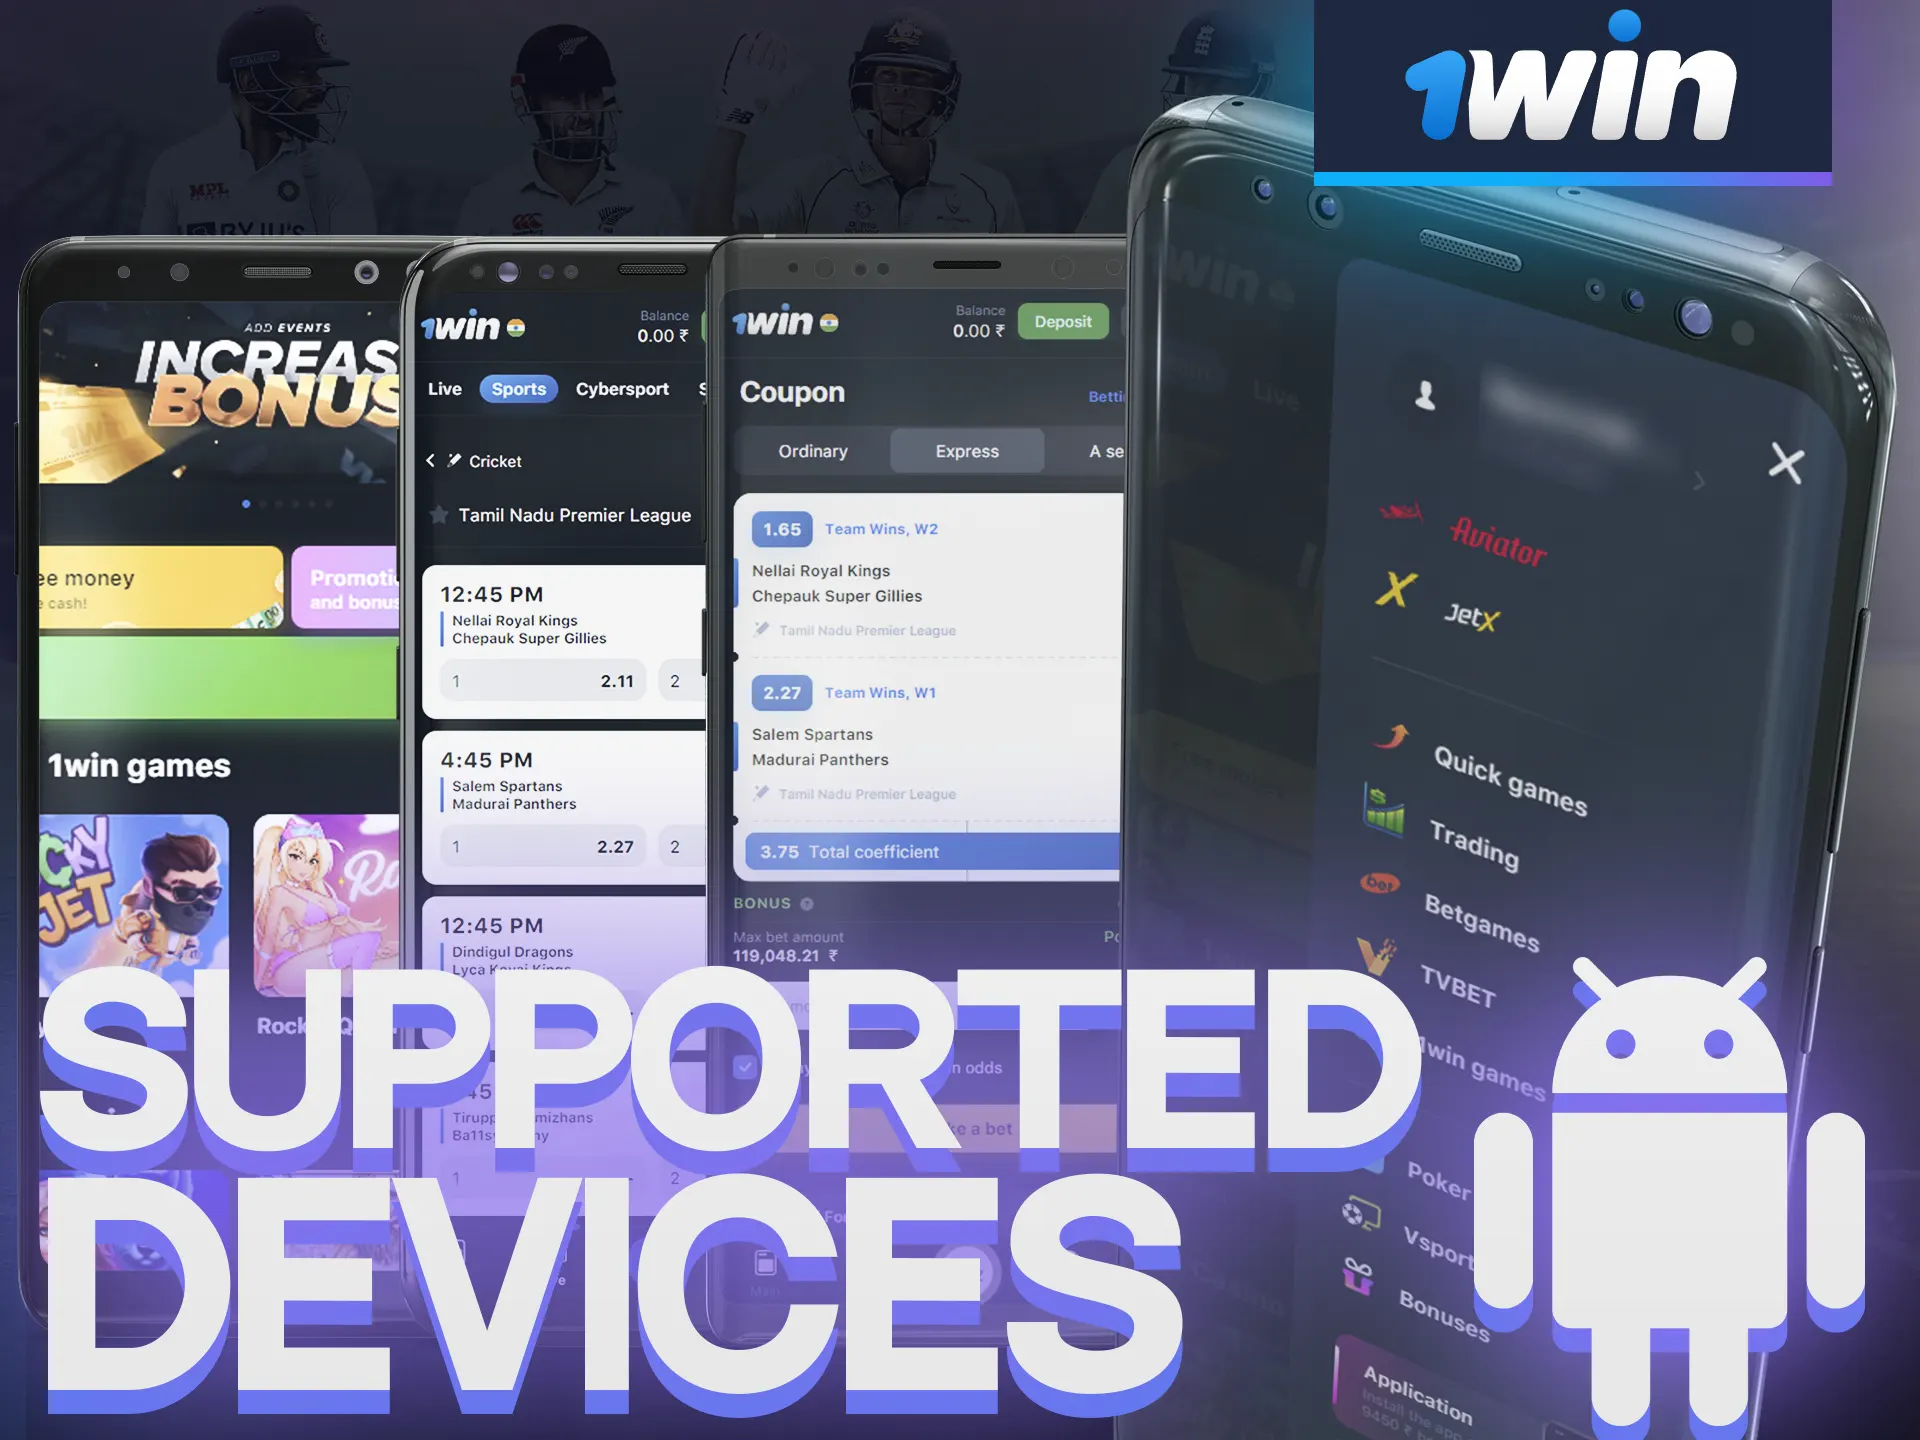 1Win app is supported on many Android devices.